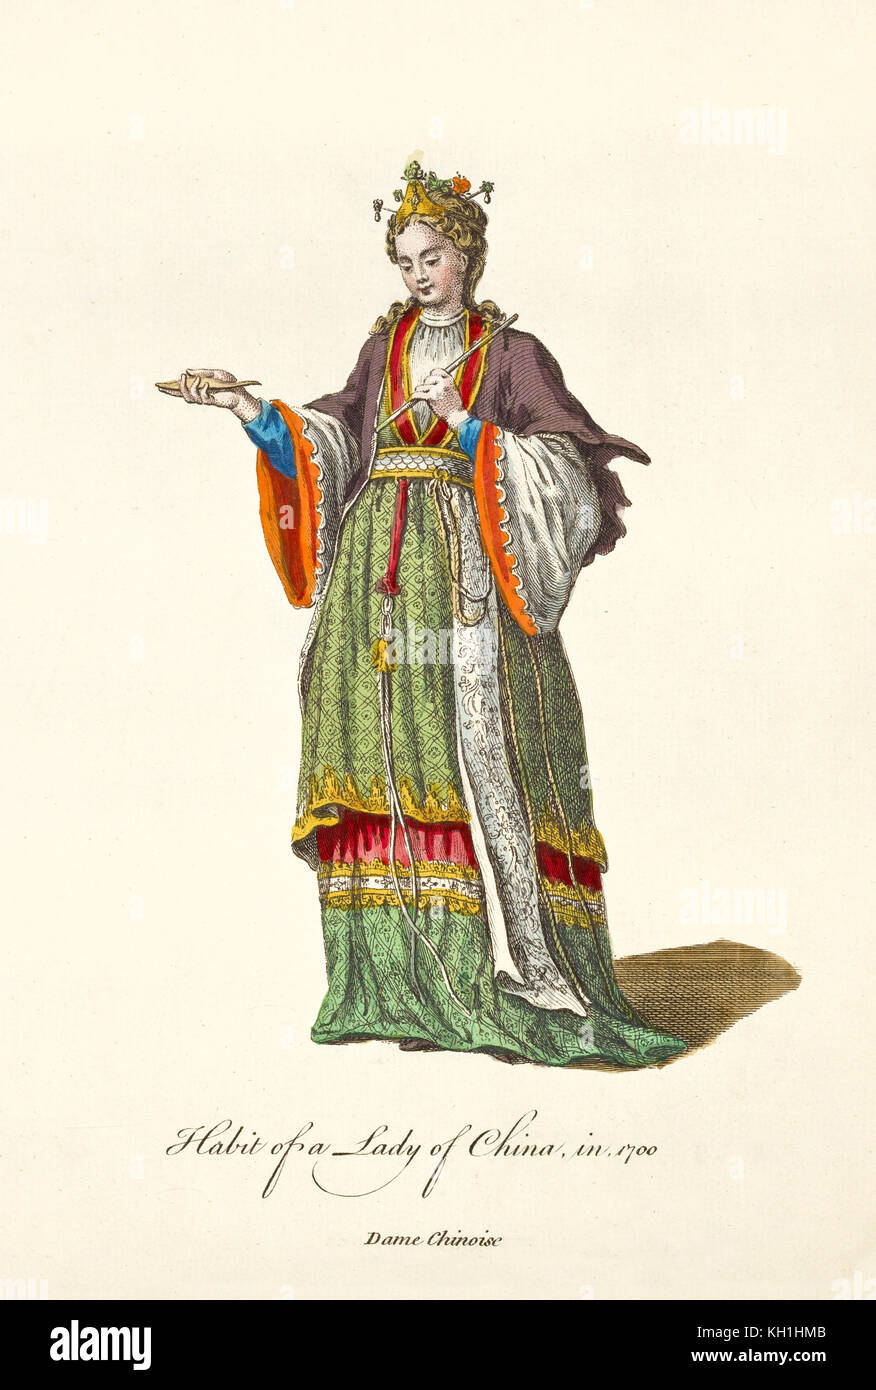 Chinese Lady in traditional dresses in 1700. Long colorful dress richly decorated. Old illustration by J.M. Vien, publ. T. Jefferys, London, 1757-1772 Stock Photo